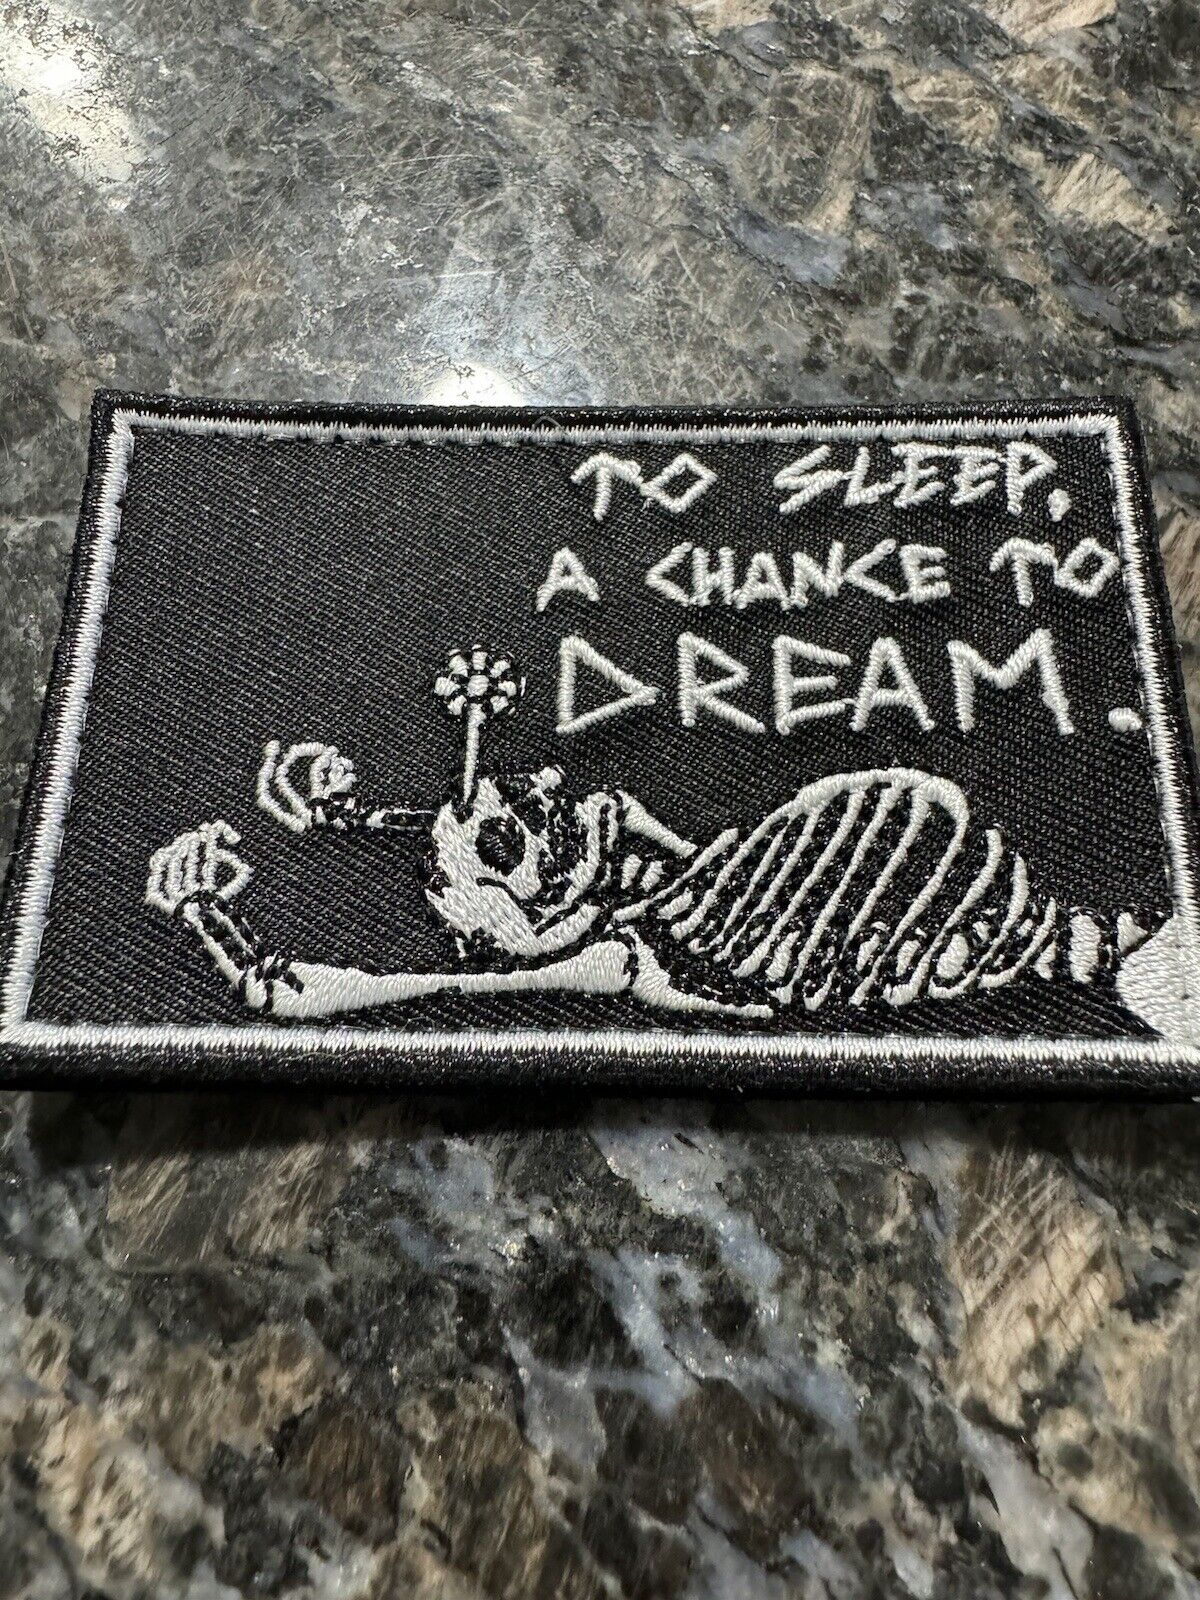 Team Room Designs To Sleep, A Chance To DREAM. patch. Rare.